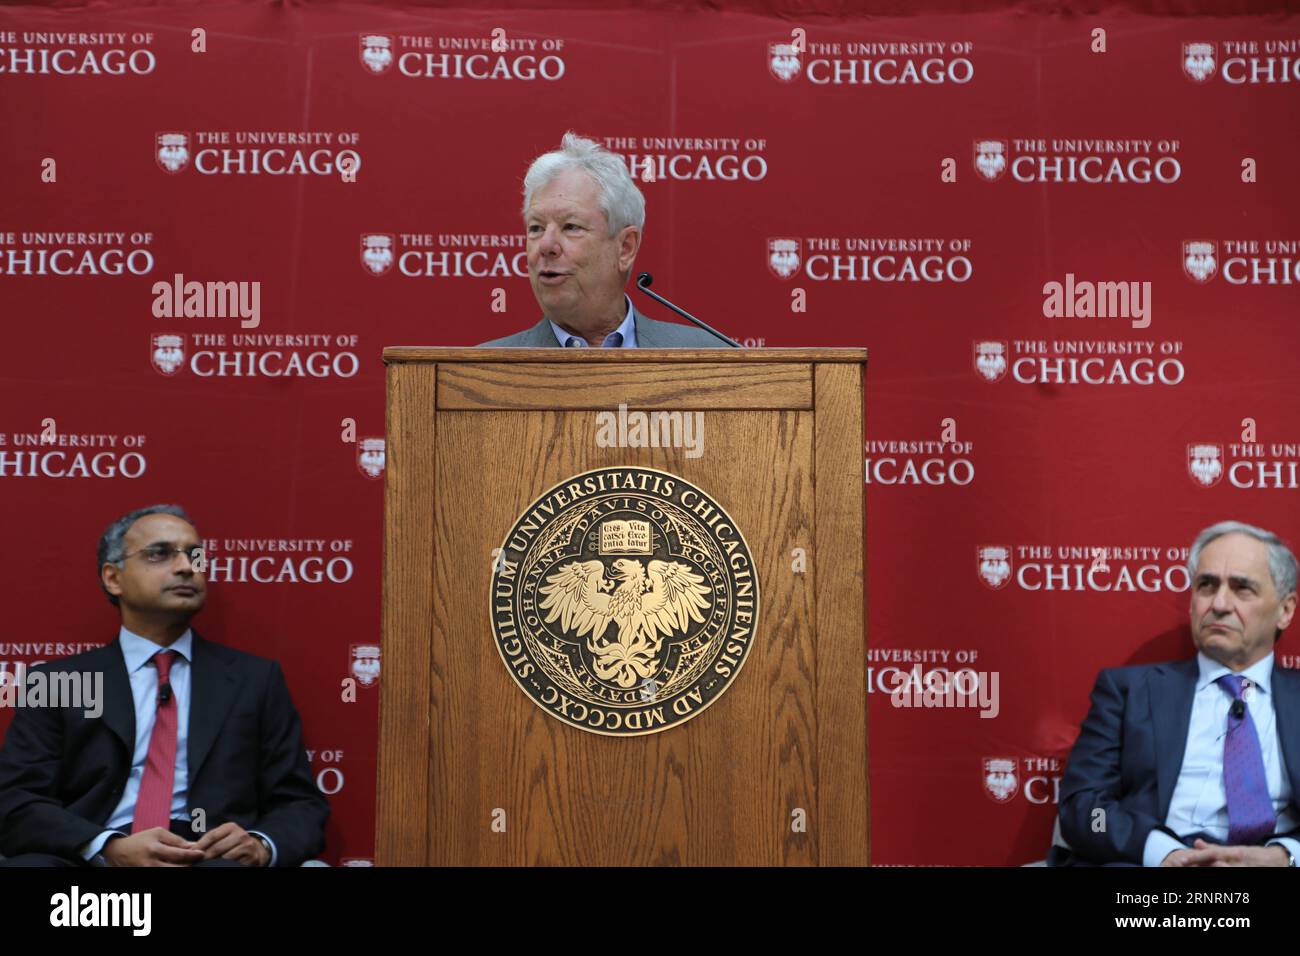 (171009) -- CHICAGO, Oct. 9, 2017 -- Richard H. Thaler (C), 2017 Nobel Prize winner in Economics, speaks during a press conference at University of Chicago Booth School of Business in Chicago, the United States, on Oct. 9, 2017. The 2017 Nobel Prize in Economics was awarded to Richard H. Thaler for his contributions to behavioural economics, announced the Royal Swedish Academy of Sciences on Monday. ) U.S.-CHICAGO-NOBEL PRIZE IN ECONOMICS-RICHARD H. THALER-PRESS CONFERENCE WangxQiang PUBLICATIONxNOTxINxCHN Stock Photo